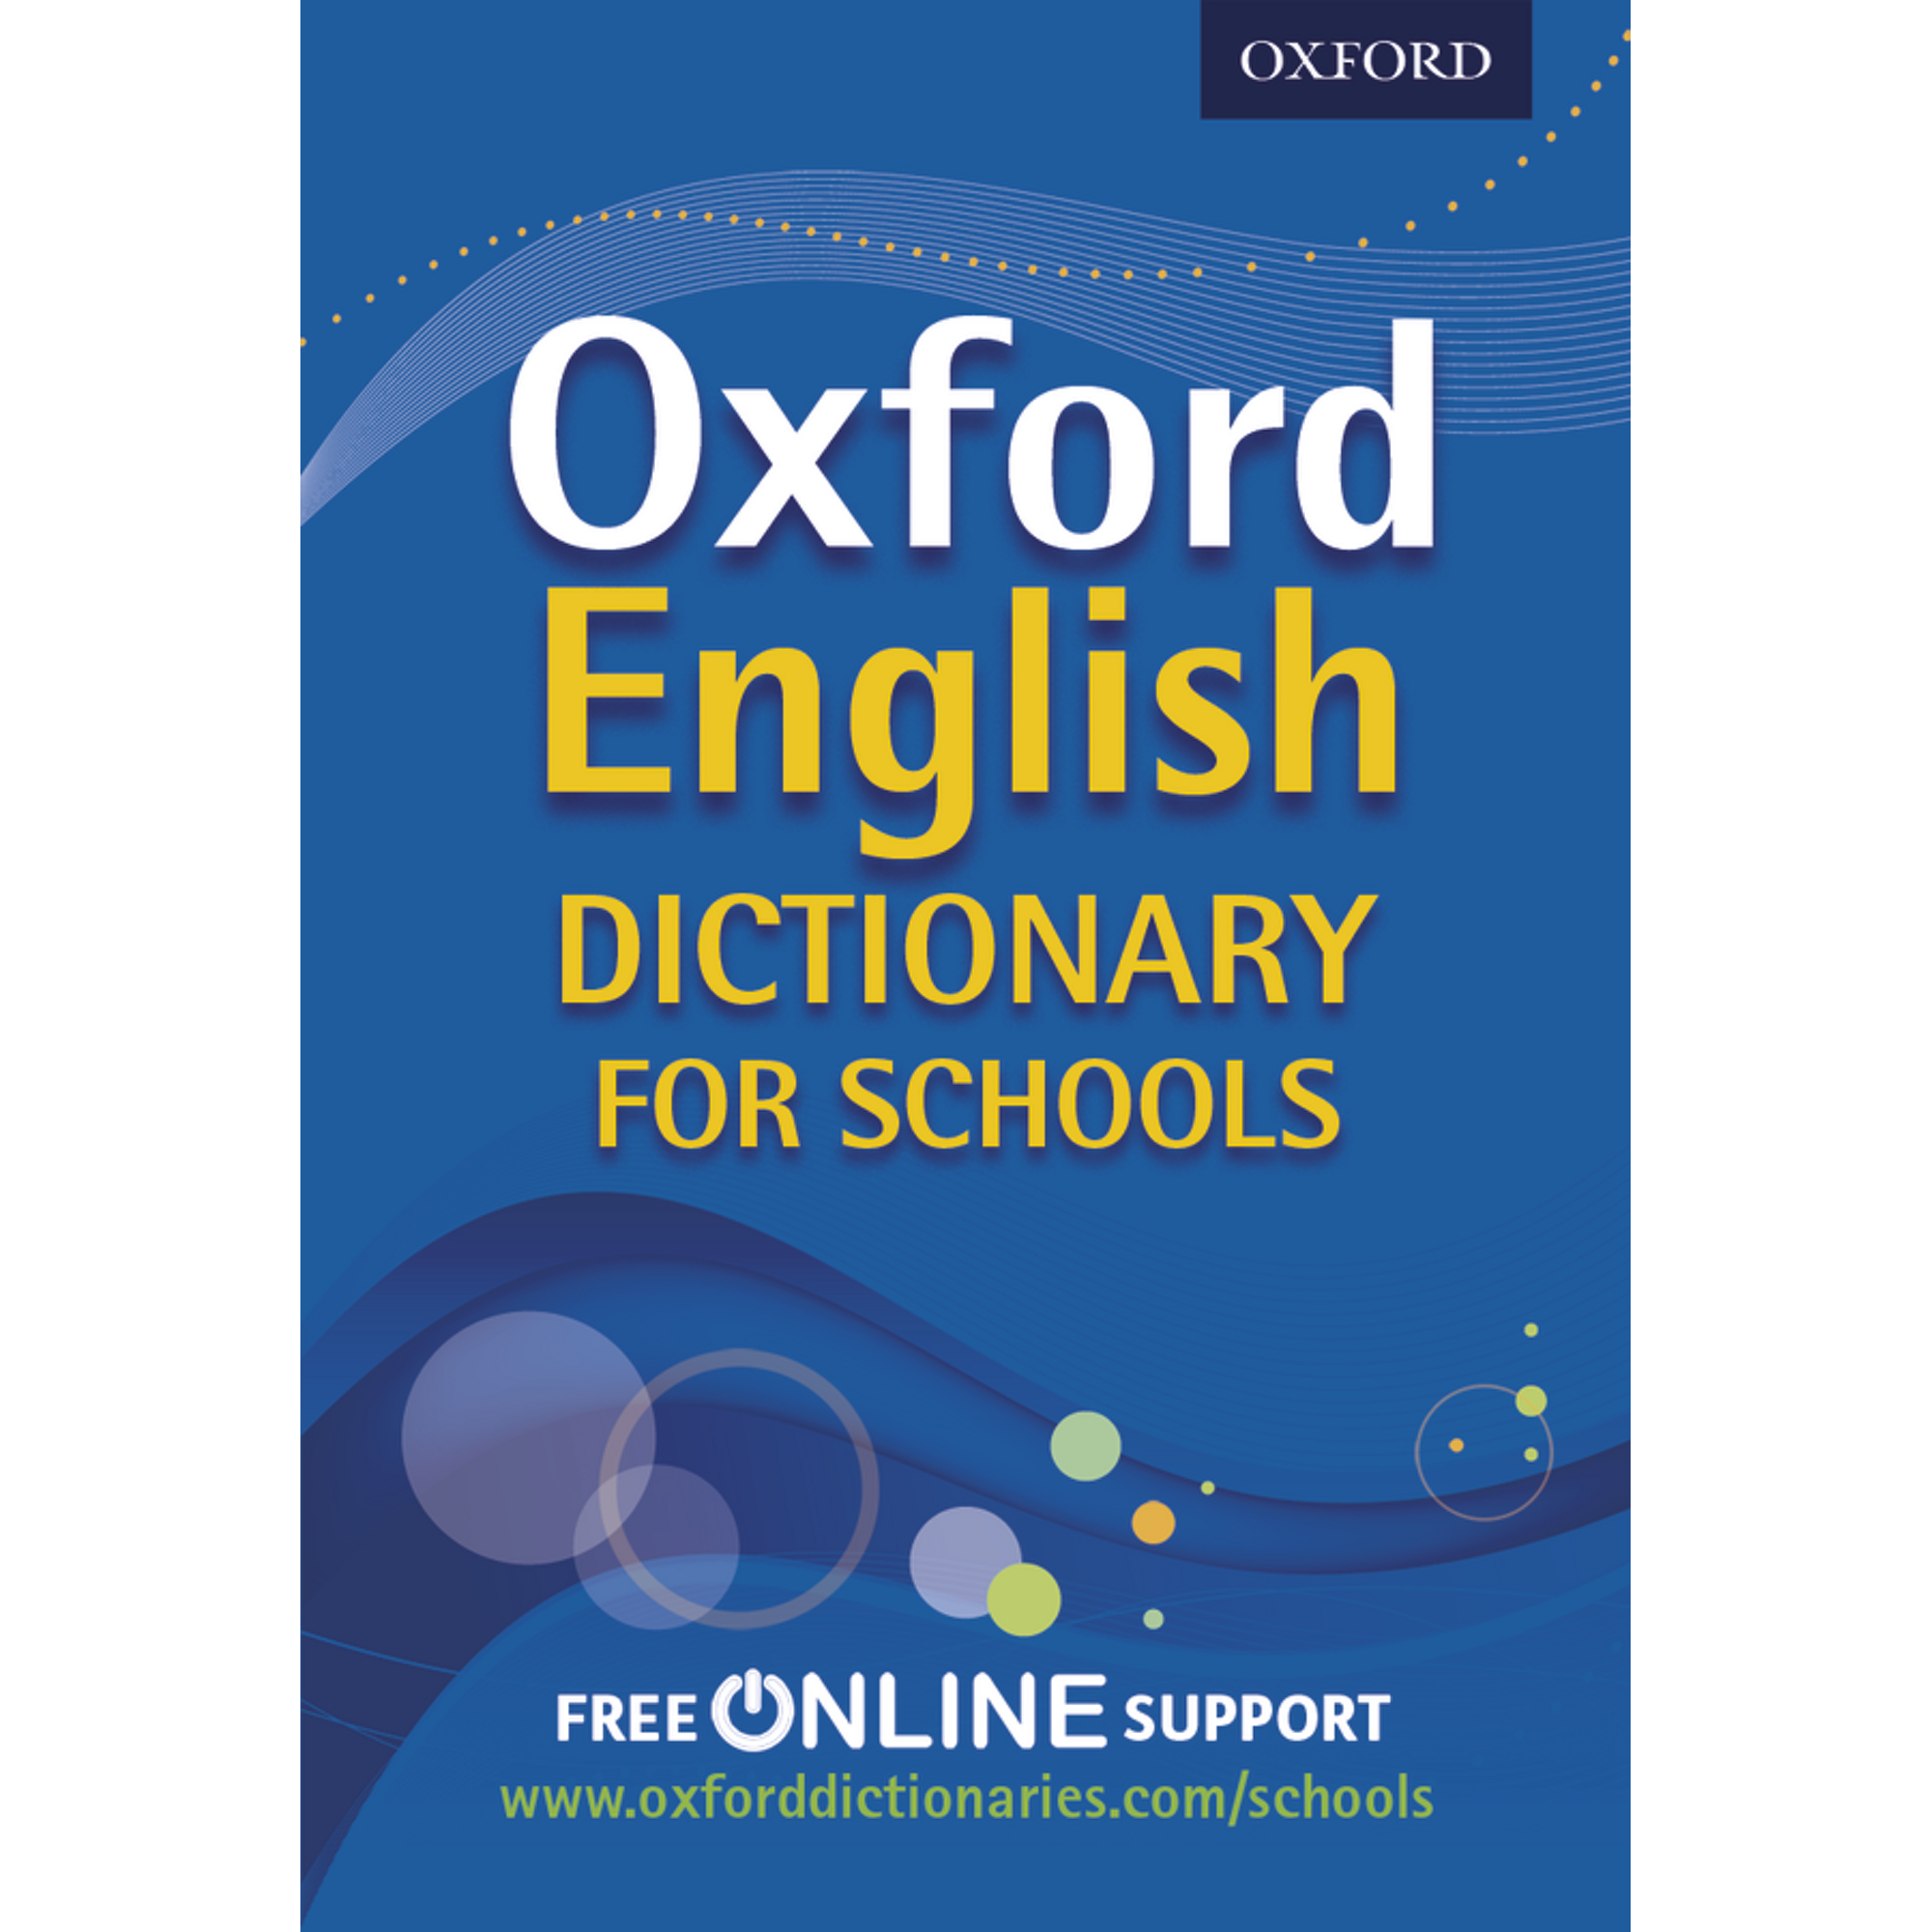 citing oxford english dictionary book